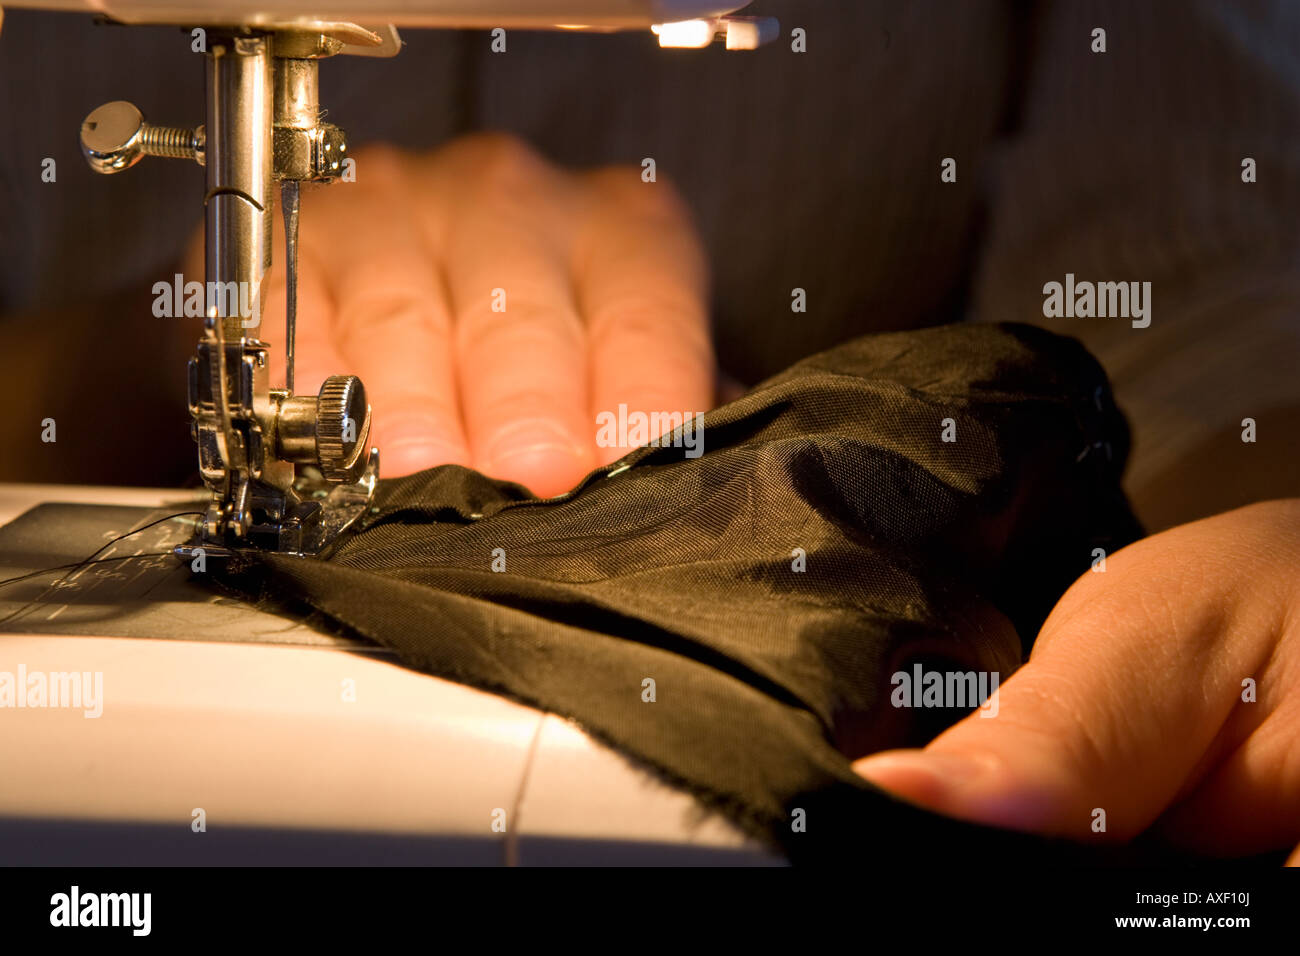 Close up of a woman using a sewing machine to stitch black fabric. With sharp focus on the needle and fabric. Stock Photo